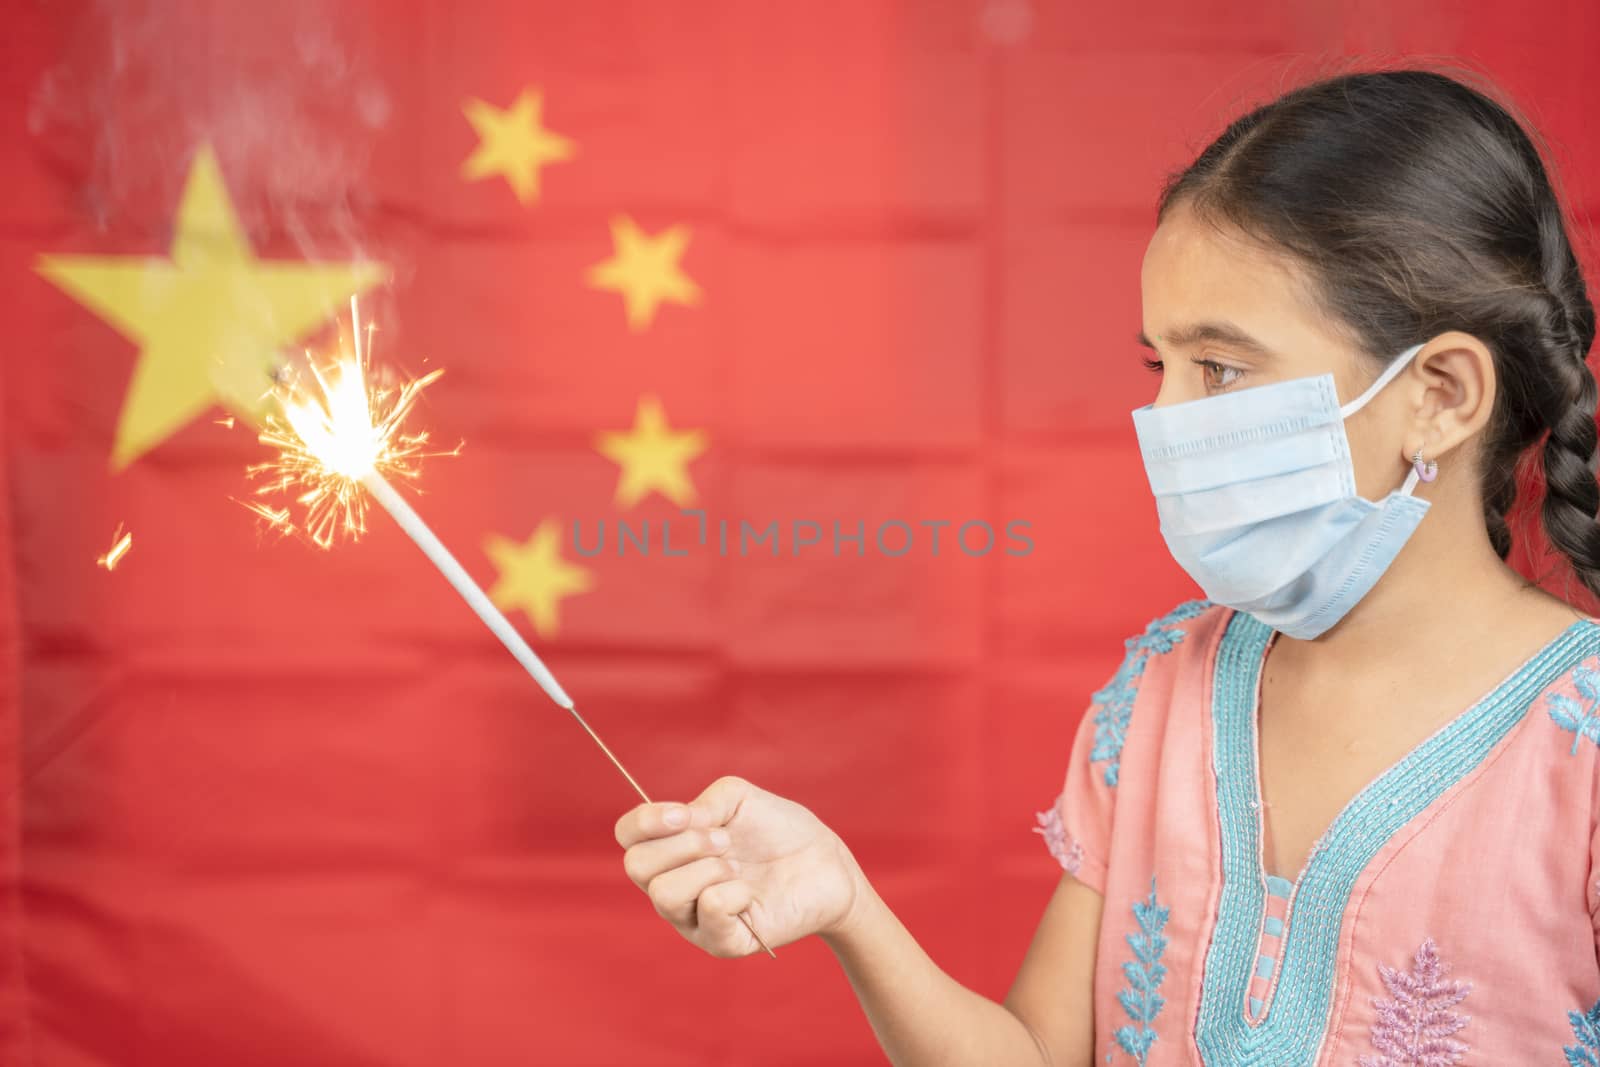 Young Girl Kid on medical mask holding Sparkler with Chinese flag as background - concept showing Celebration of Chinas National or Republic Day.